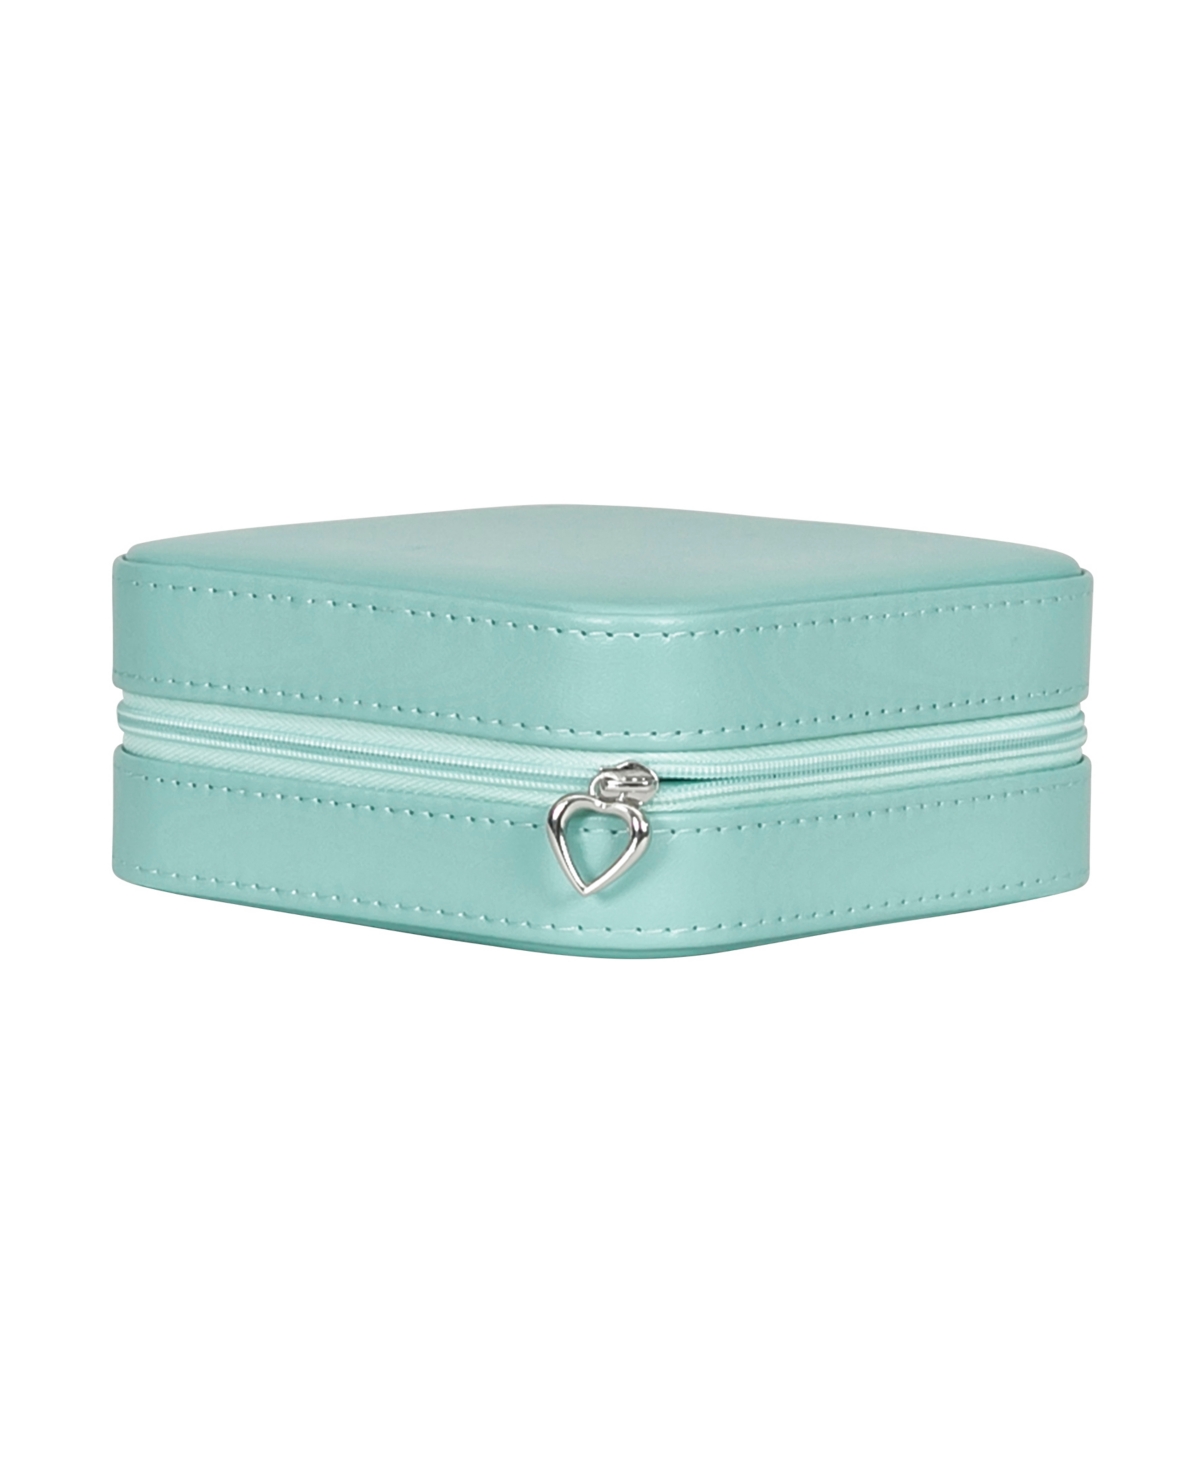 Mele Co. Josette Travel Jewelry Case in Faux Leather - Blush